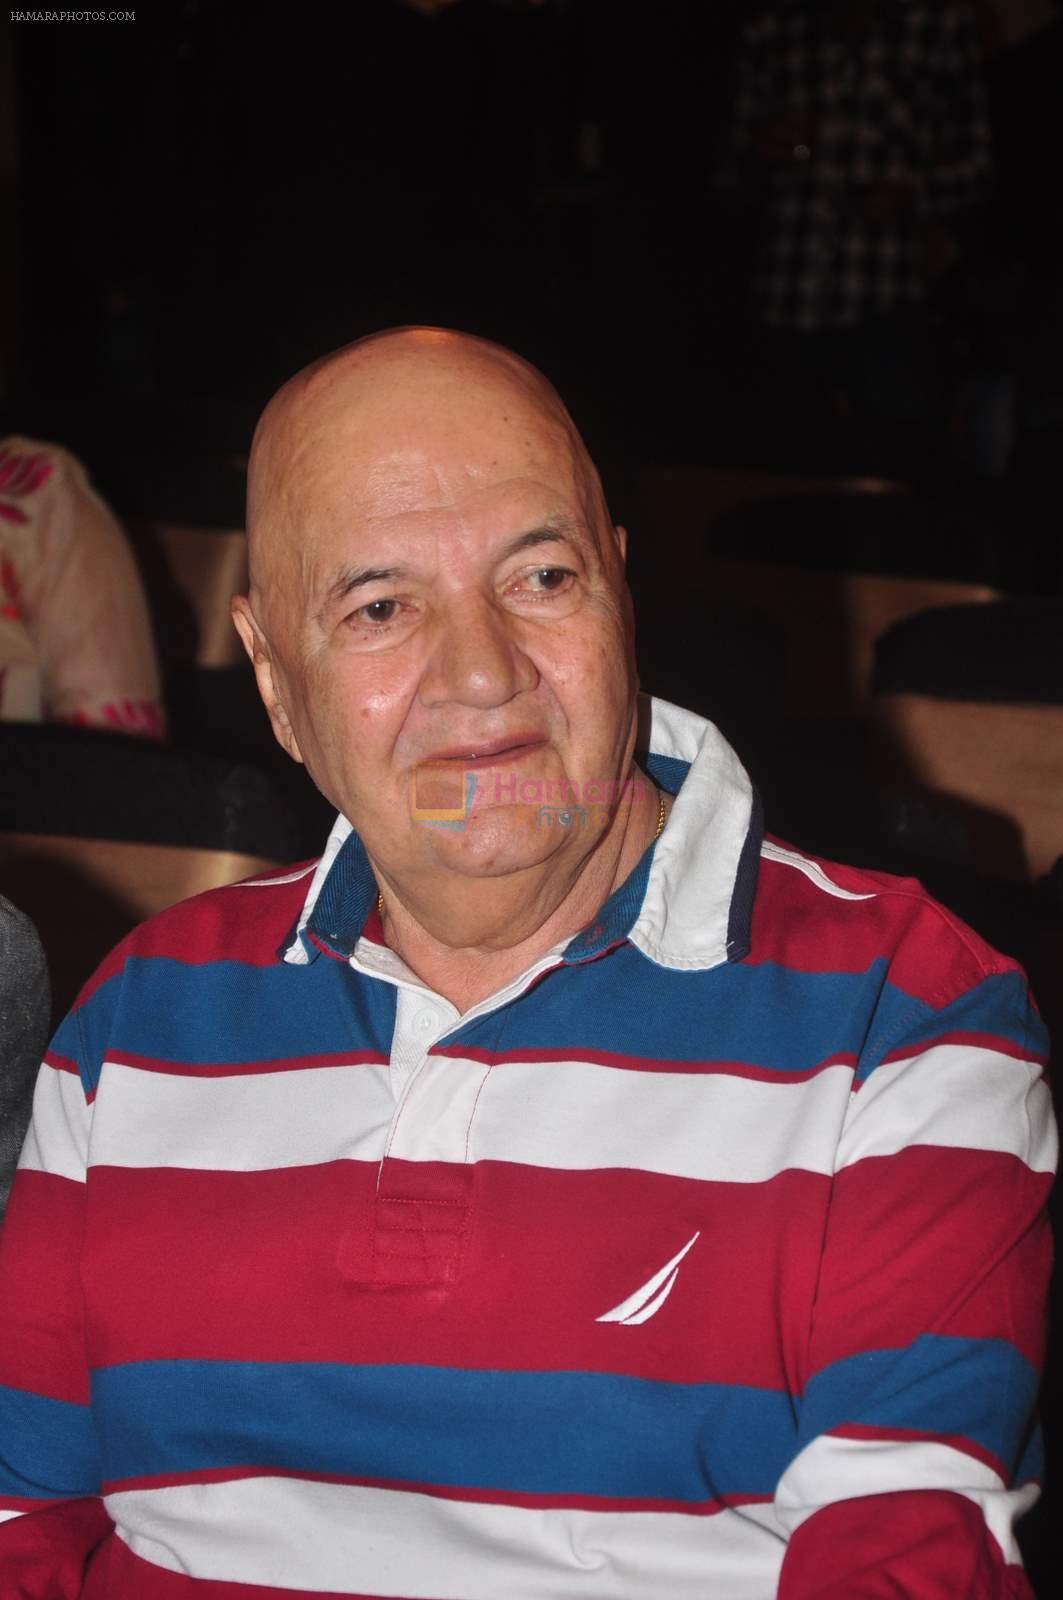 Prem Chopra at the launch of R-Vision's movie Udanchhoo directed by Vipin Parashar in Mumbai on 31st March 2015